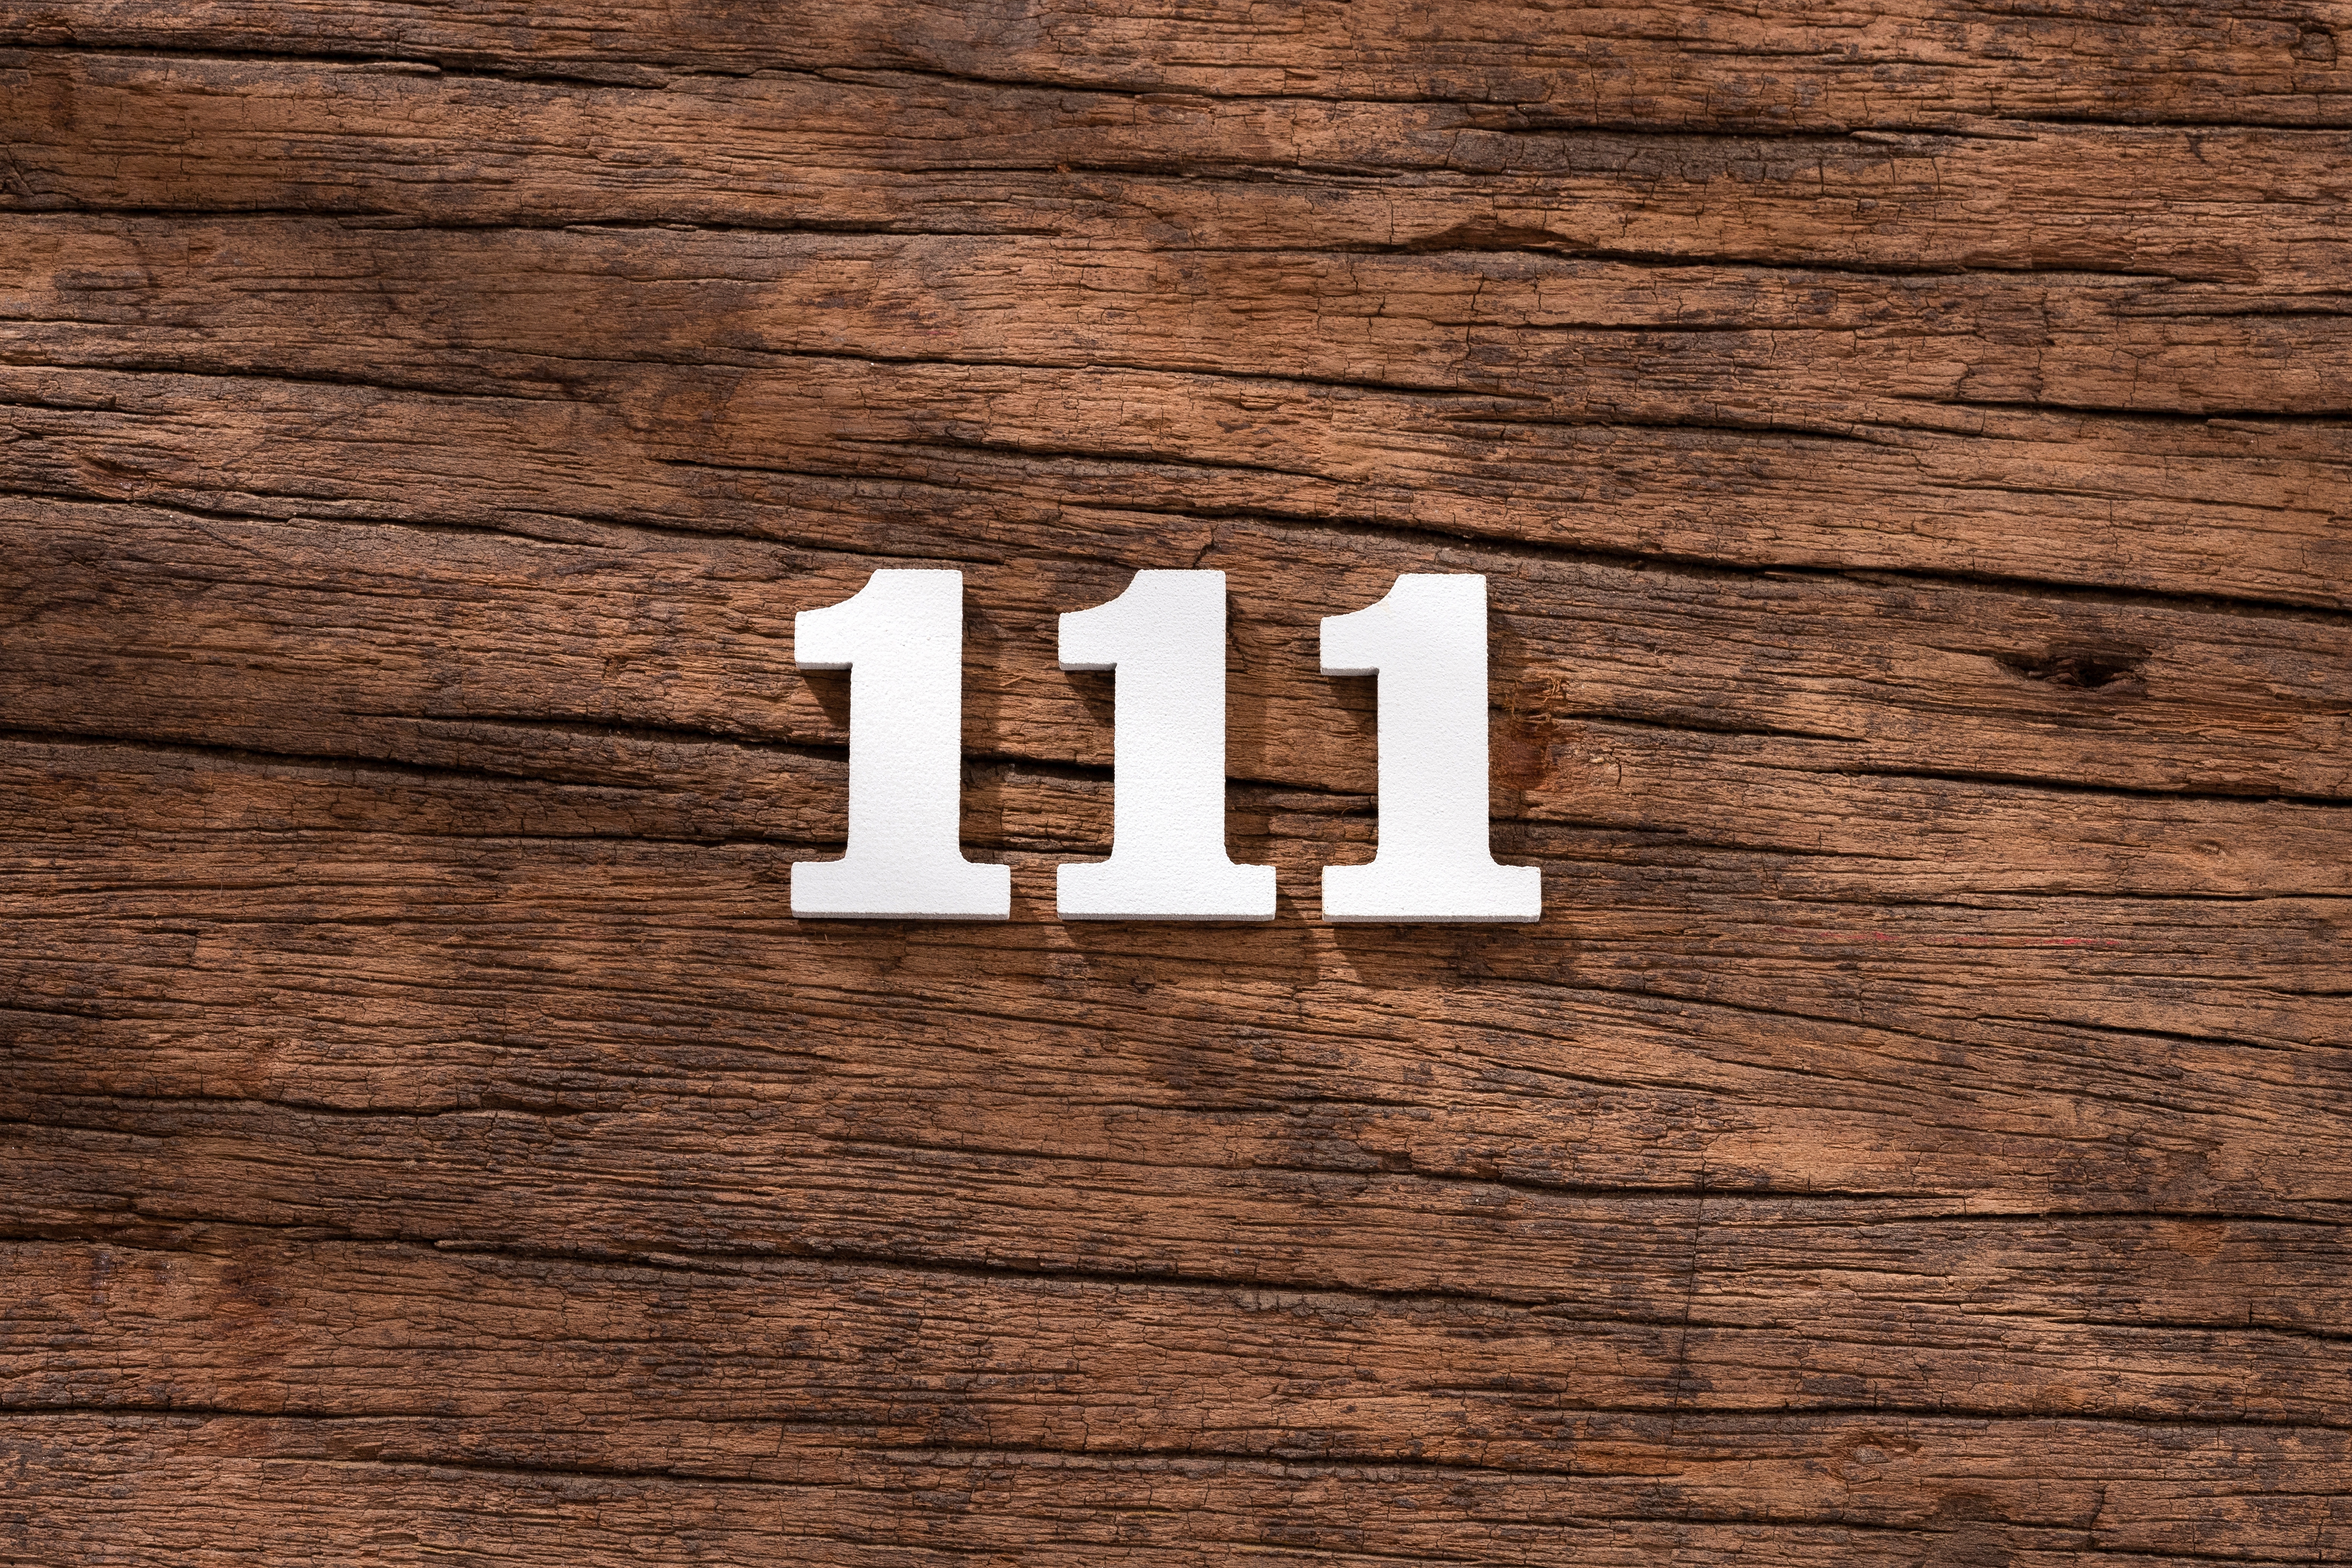 111 written in white on a wooden background